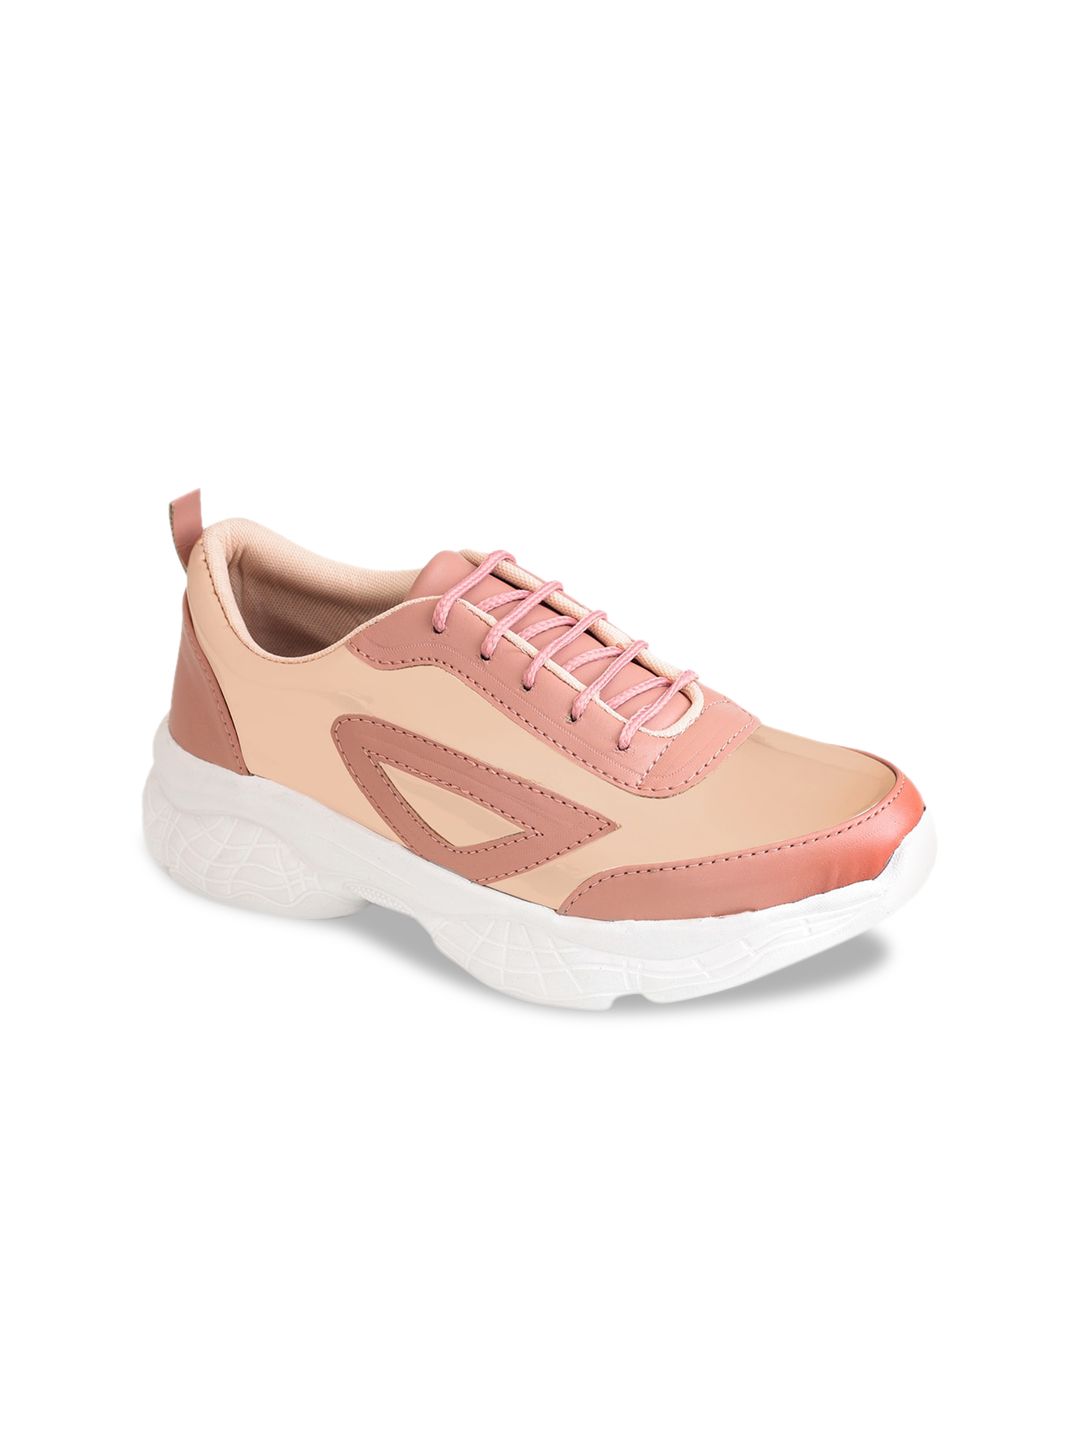 TRASE Women Pink Colourblocked Sneakers Price in India